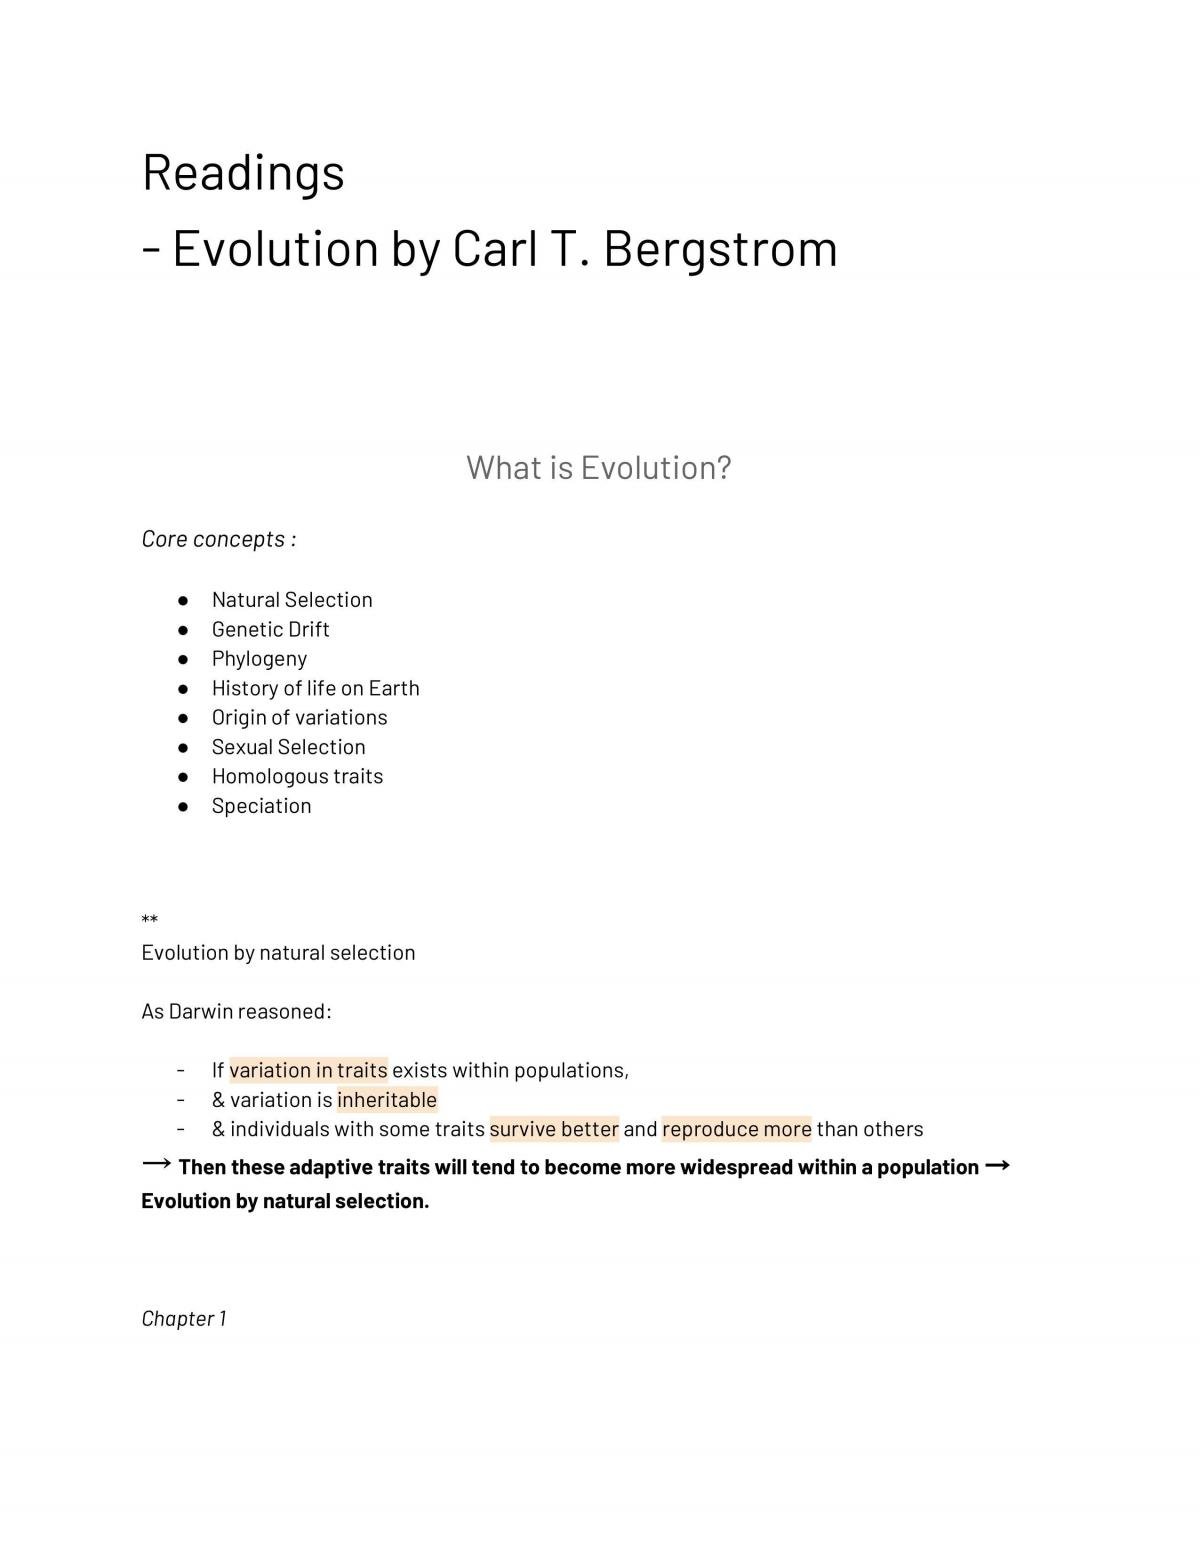 Evolutionary Biology Readings  - Page 1